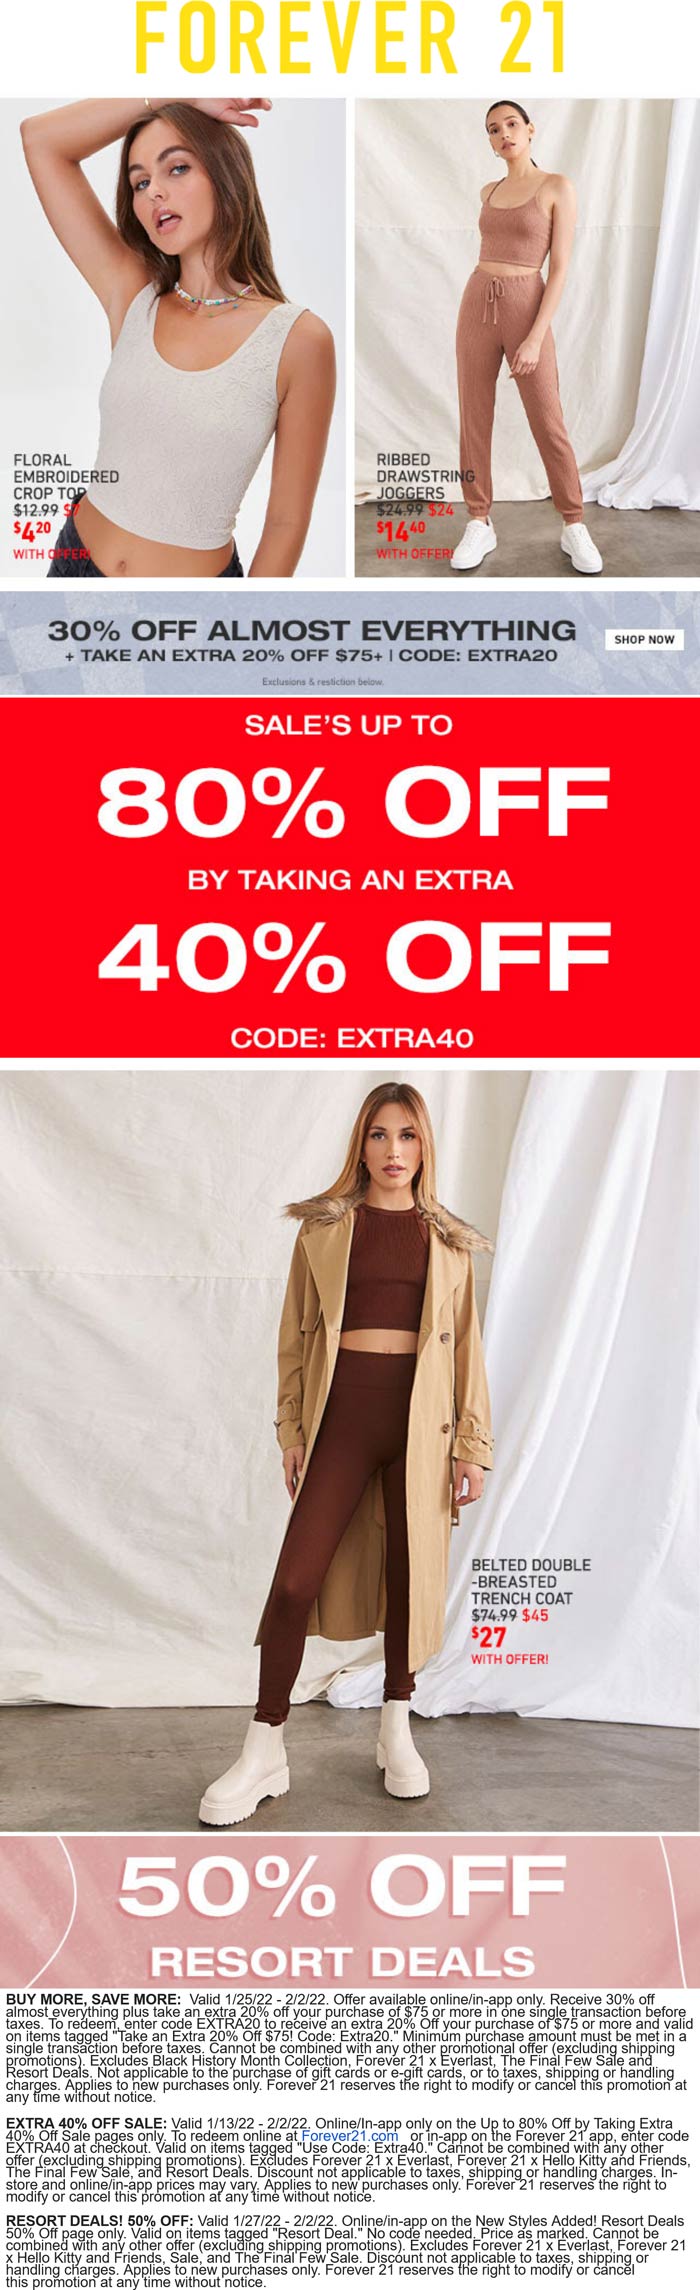 Forever 21 stores Coupon  Extra 40% off sale items & 30% everything else at Forever 21 via promo code EXTRA40 #forever21 